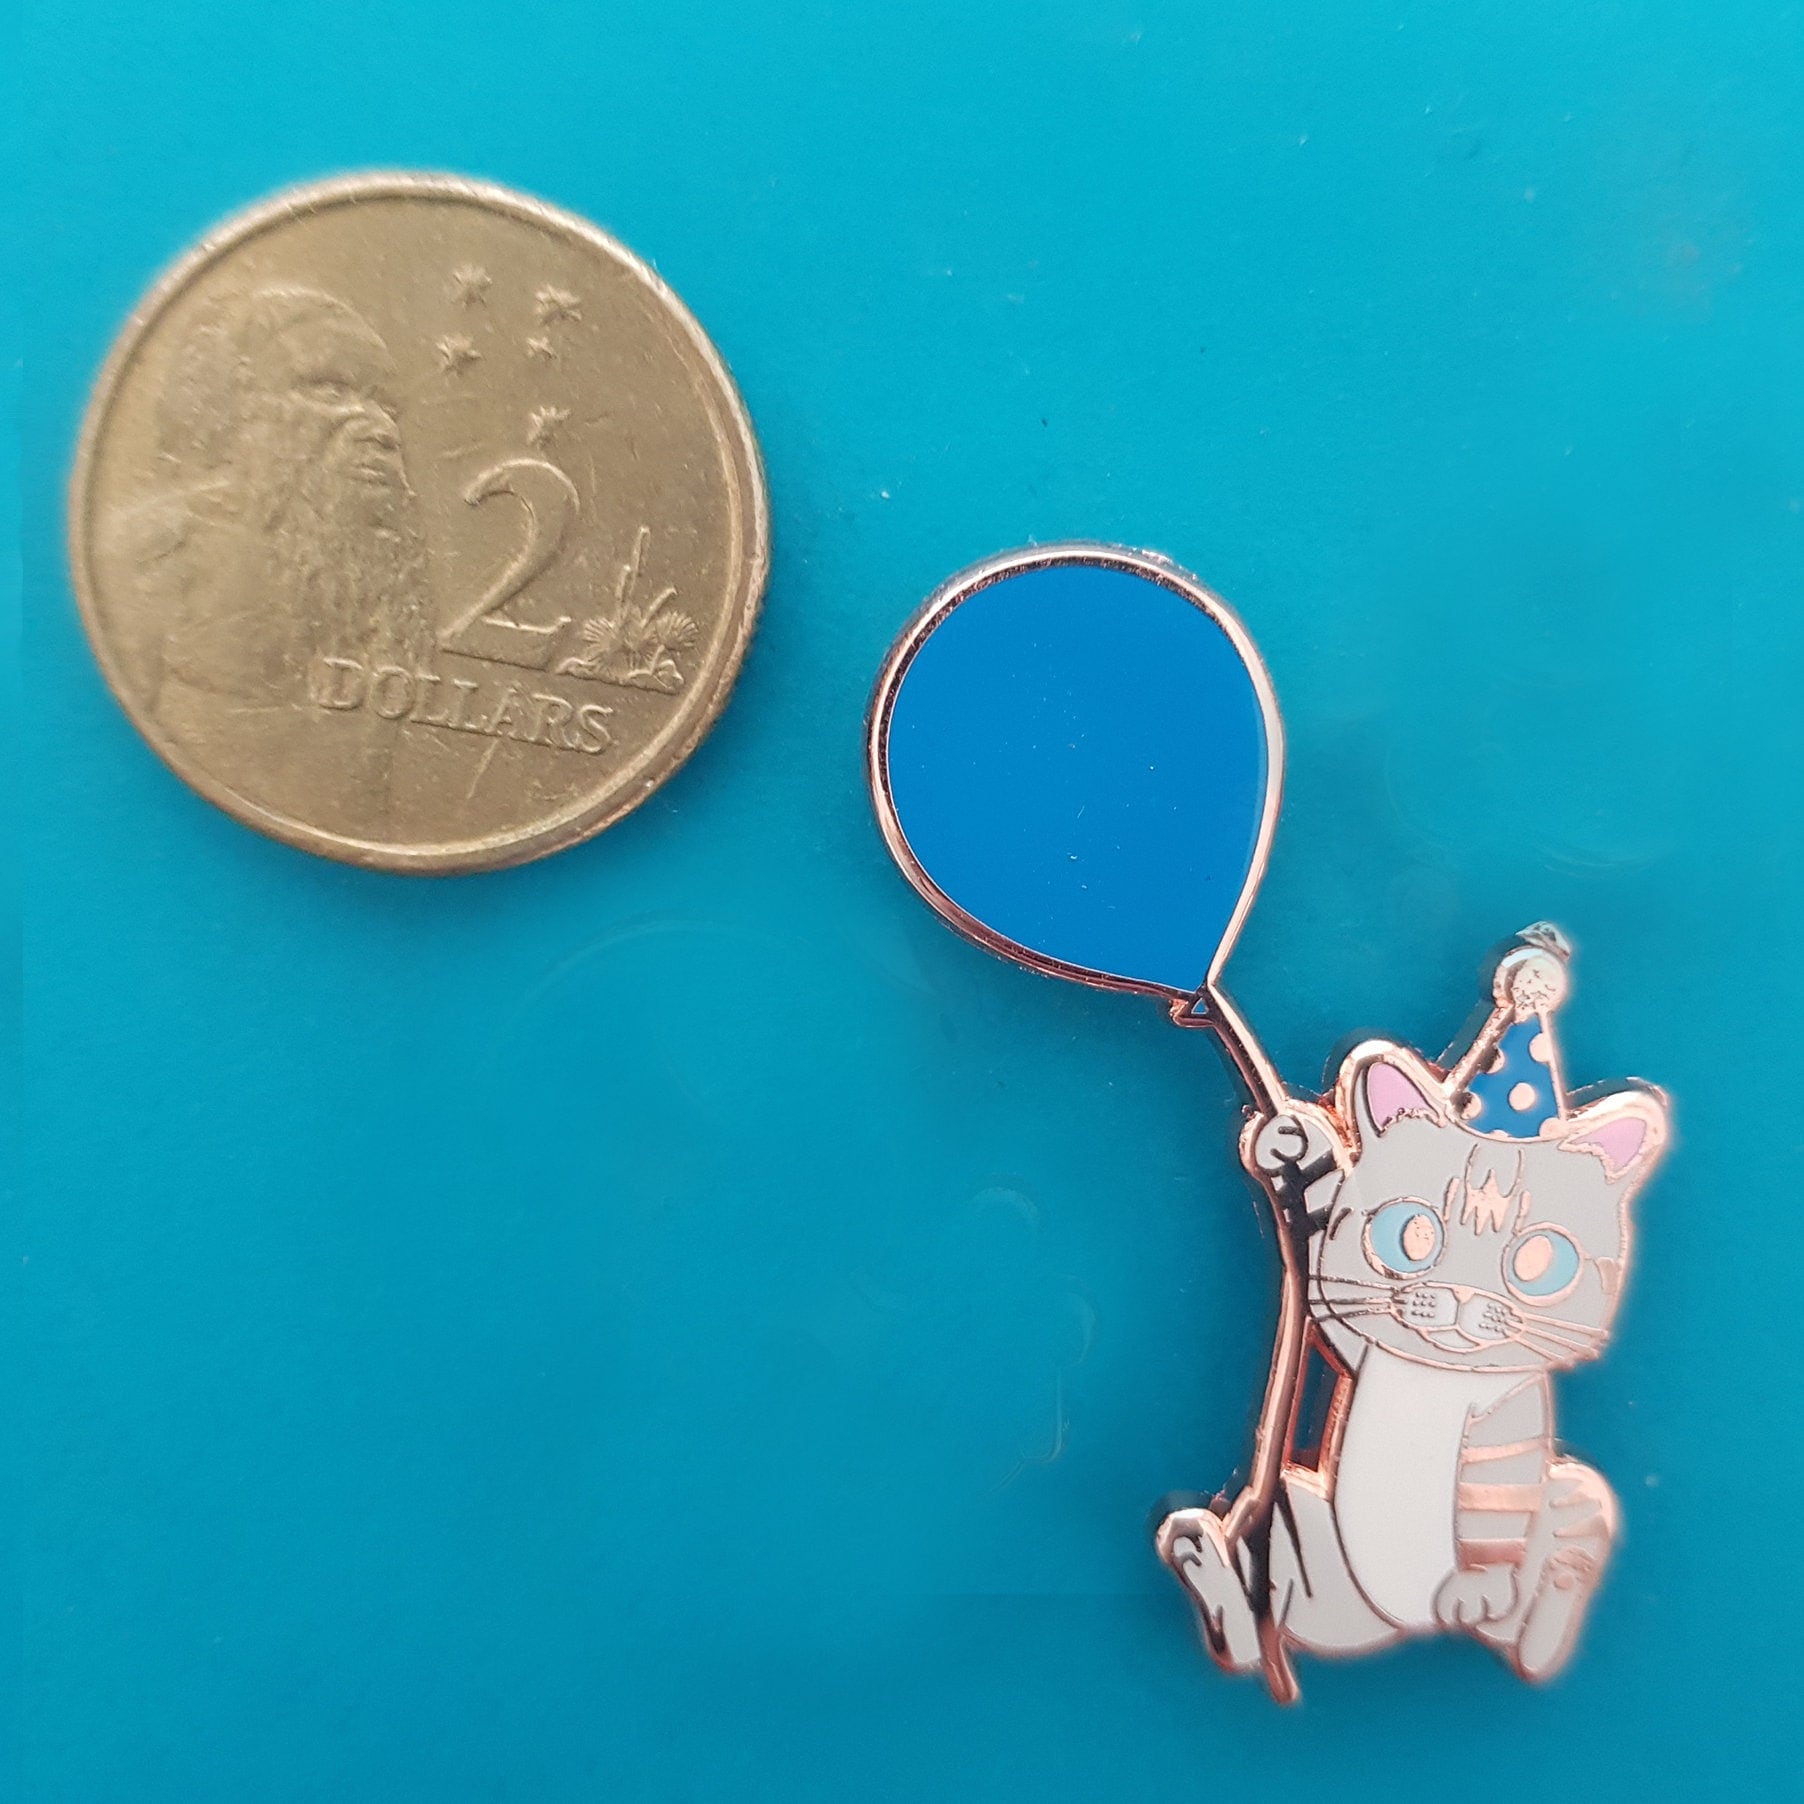 Roo&#39;s First Birthday Enamel Pin (hard enamel pin, cat with party hat and balloon), Pins, Brooches & Lapel Pins